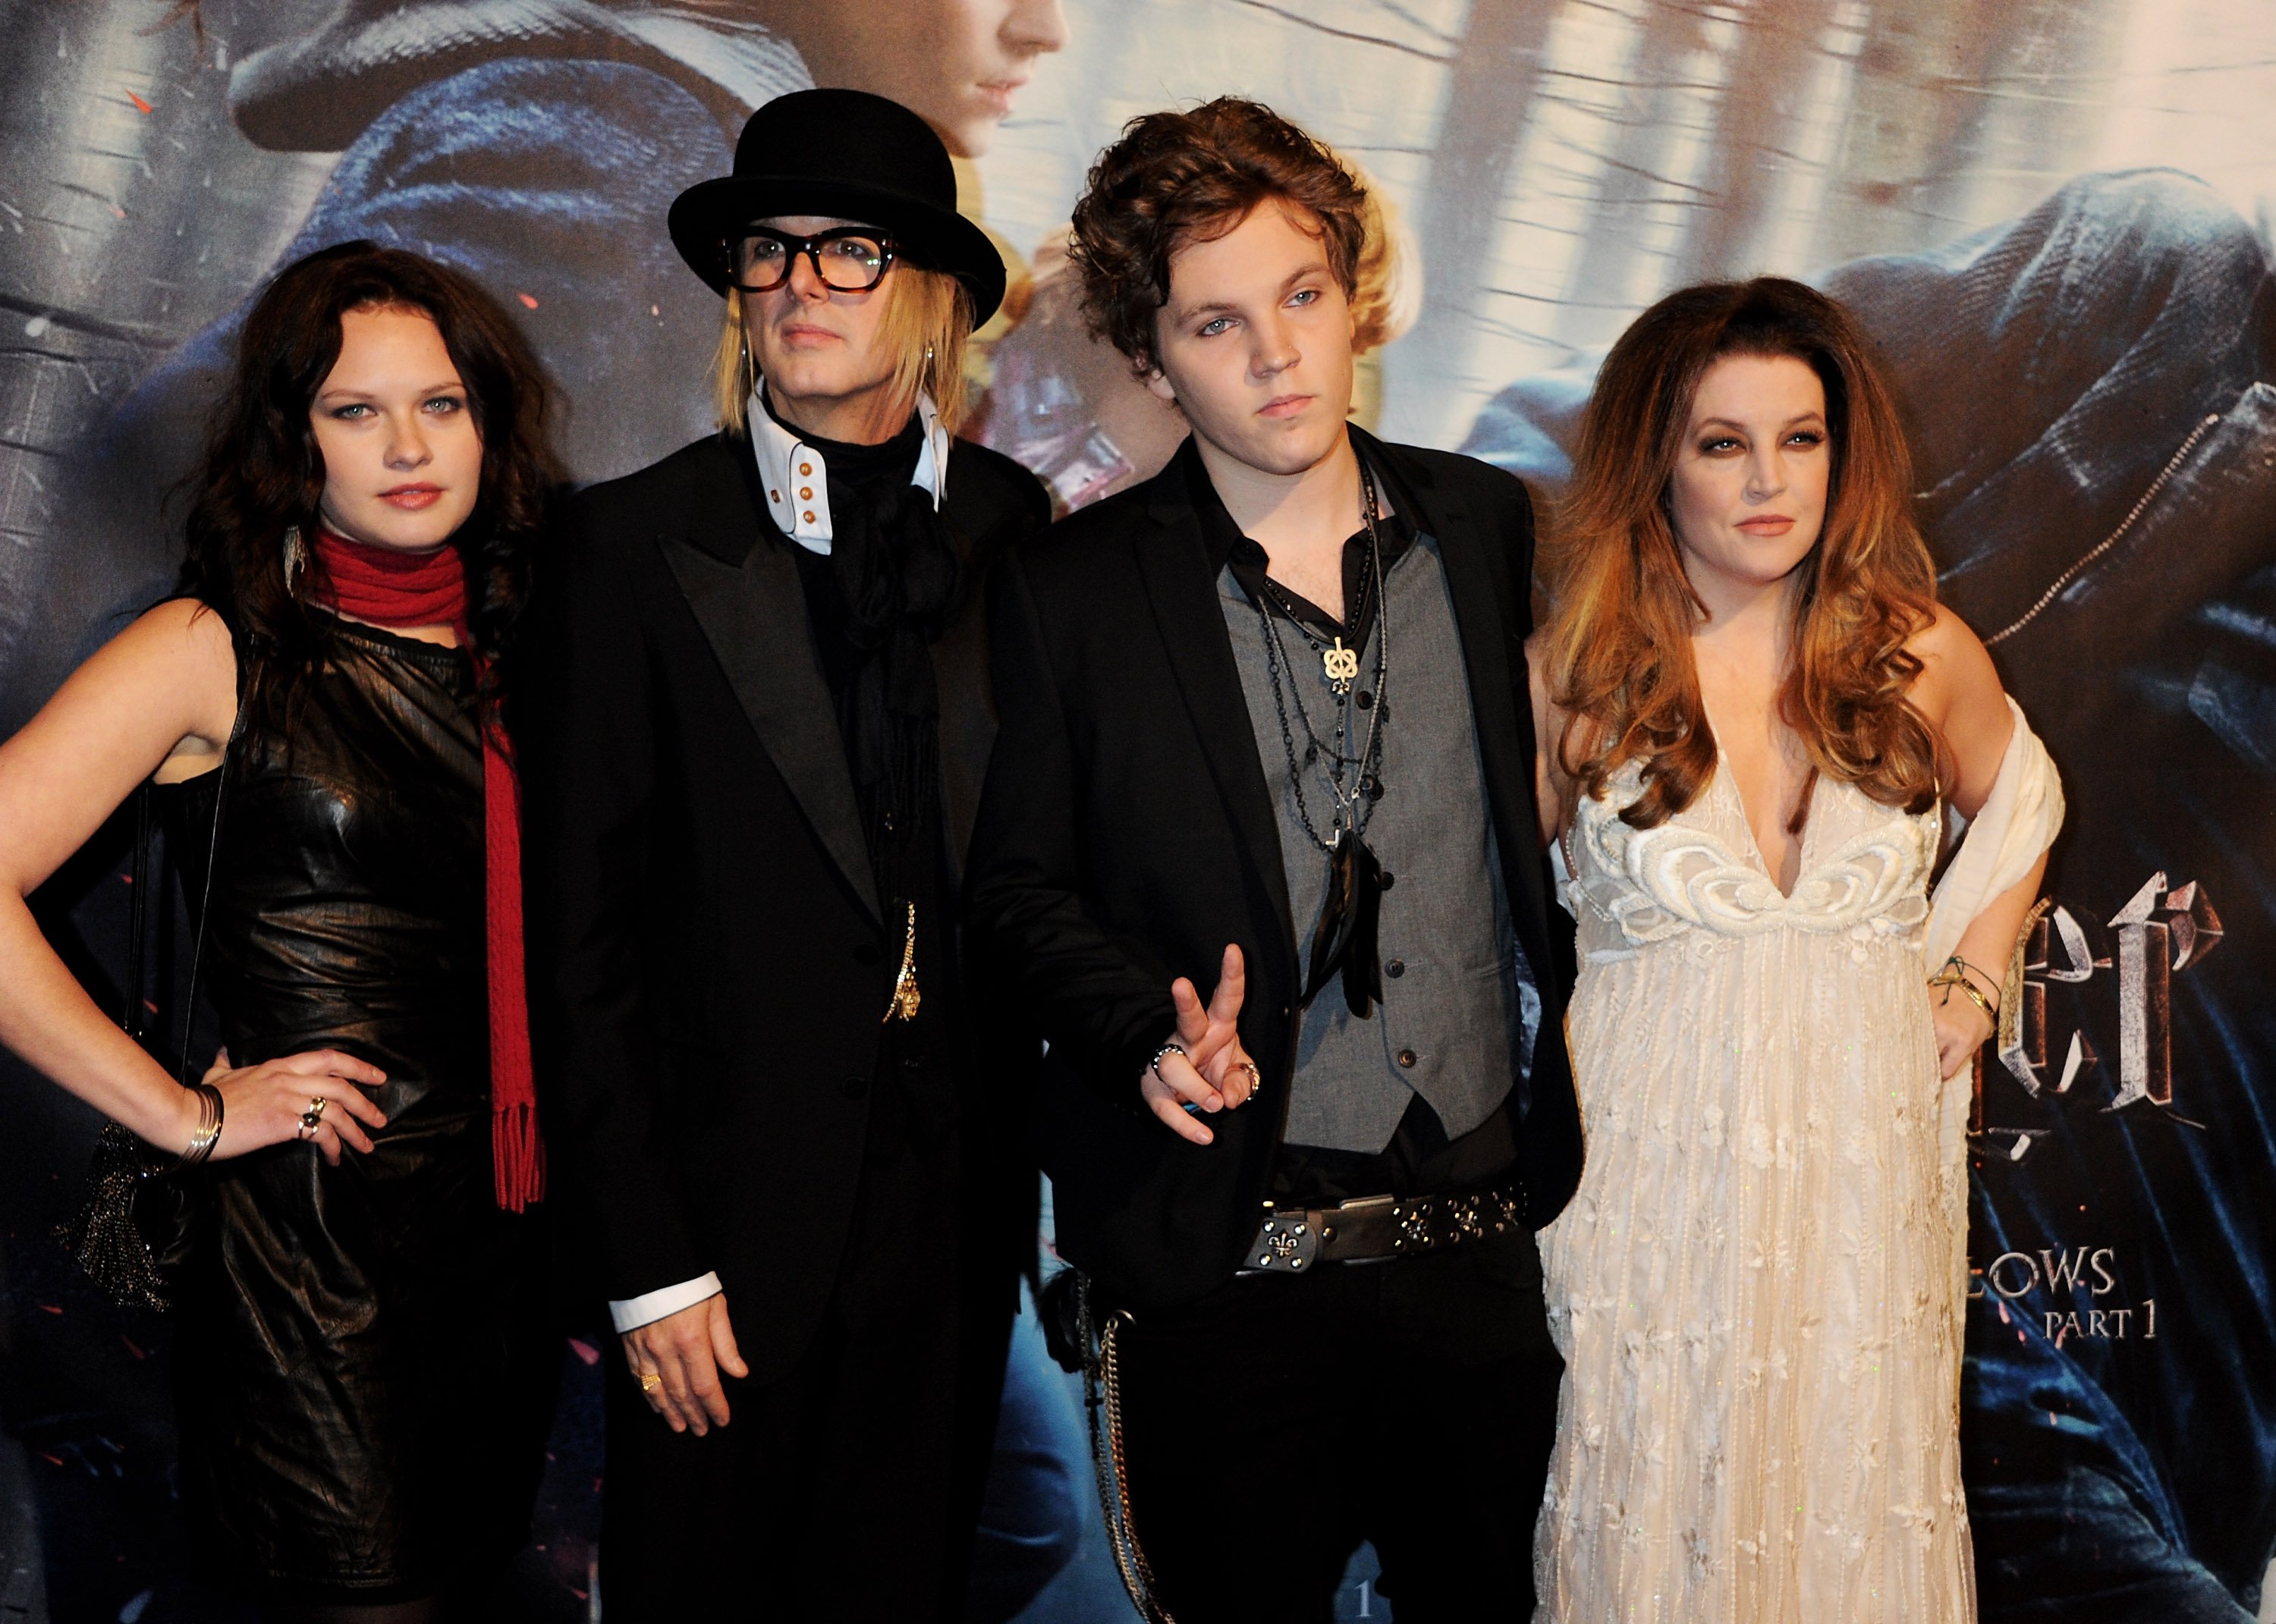 Michael Lockwood, Ben Keough, Lisa Marie Presley and guest at the world premiere of "Harry Potter And The Deathly Hallows: Part 1" in 2010 in London. | Source: Getty Images